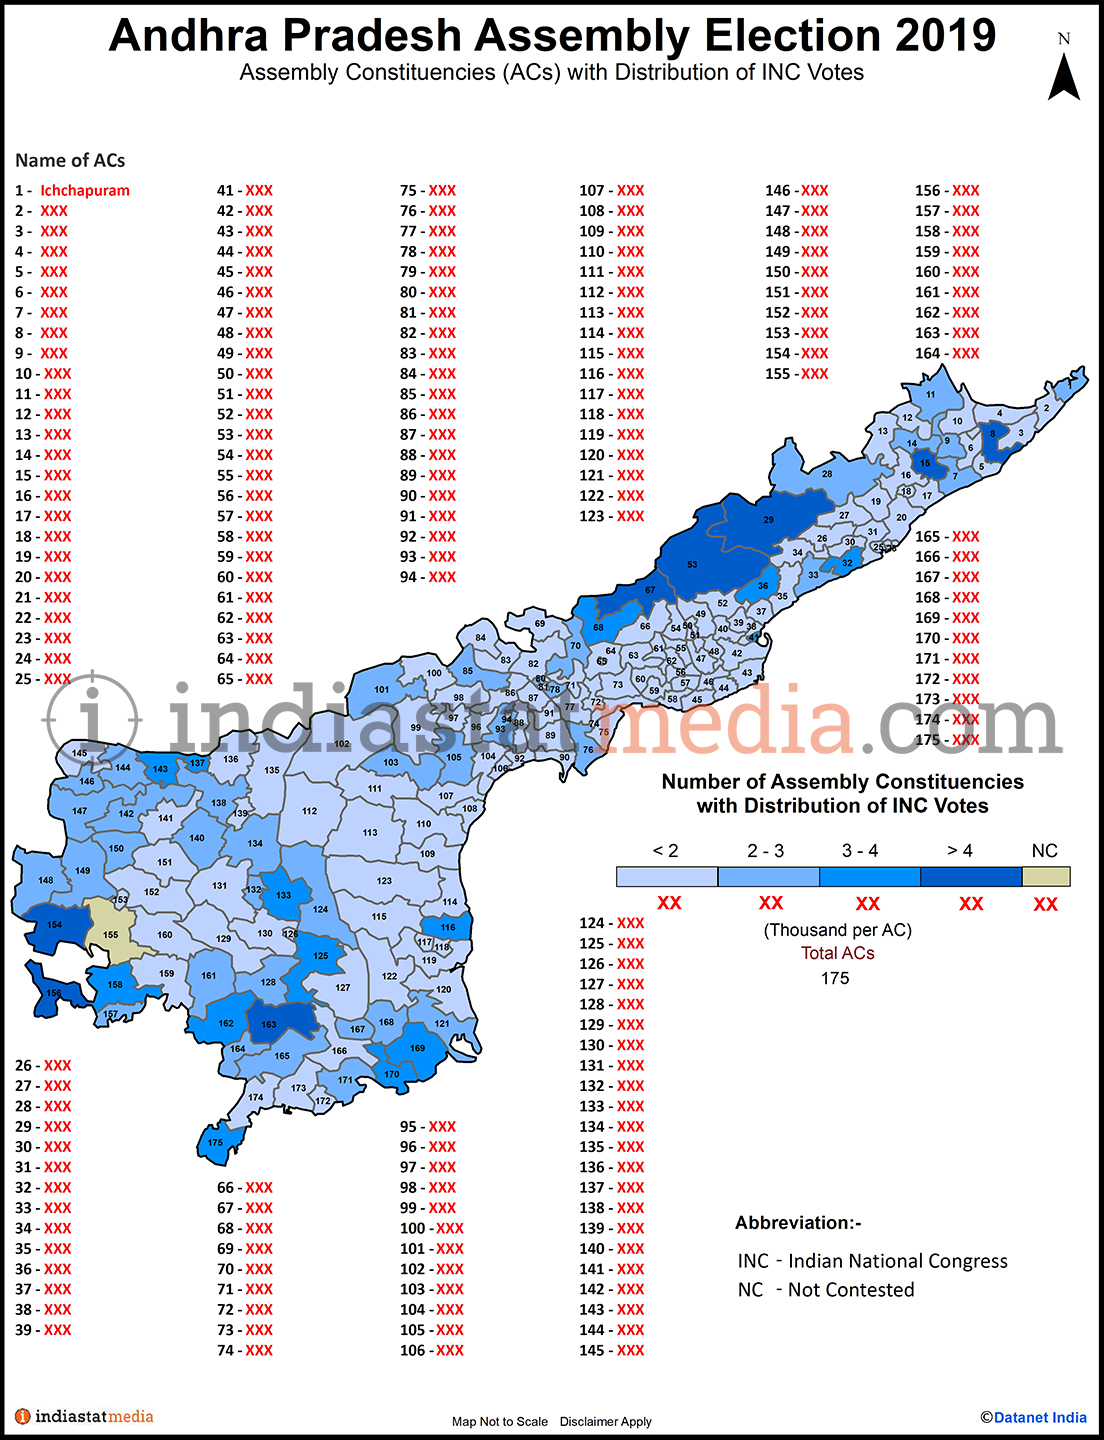 Distribution of INC Votes by Constituencies in Andhra Pradesh (Assembly Election - 2019)